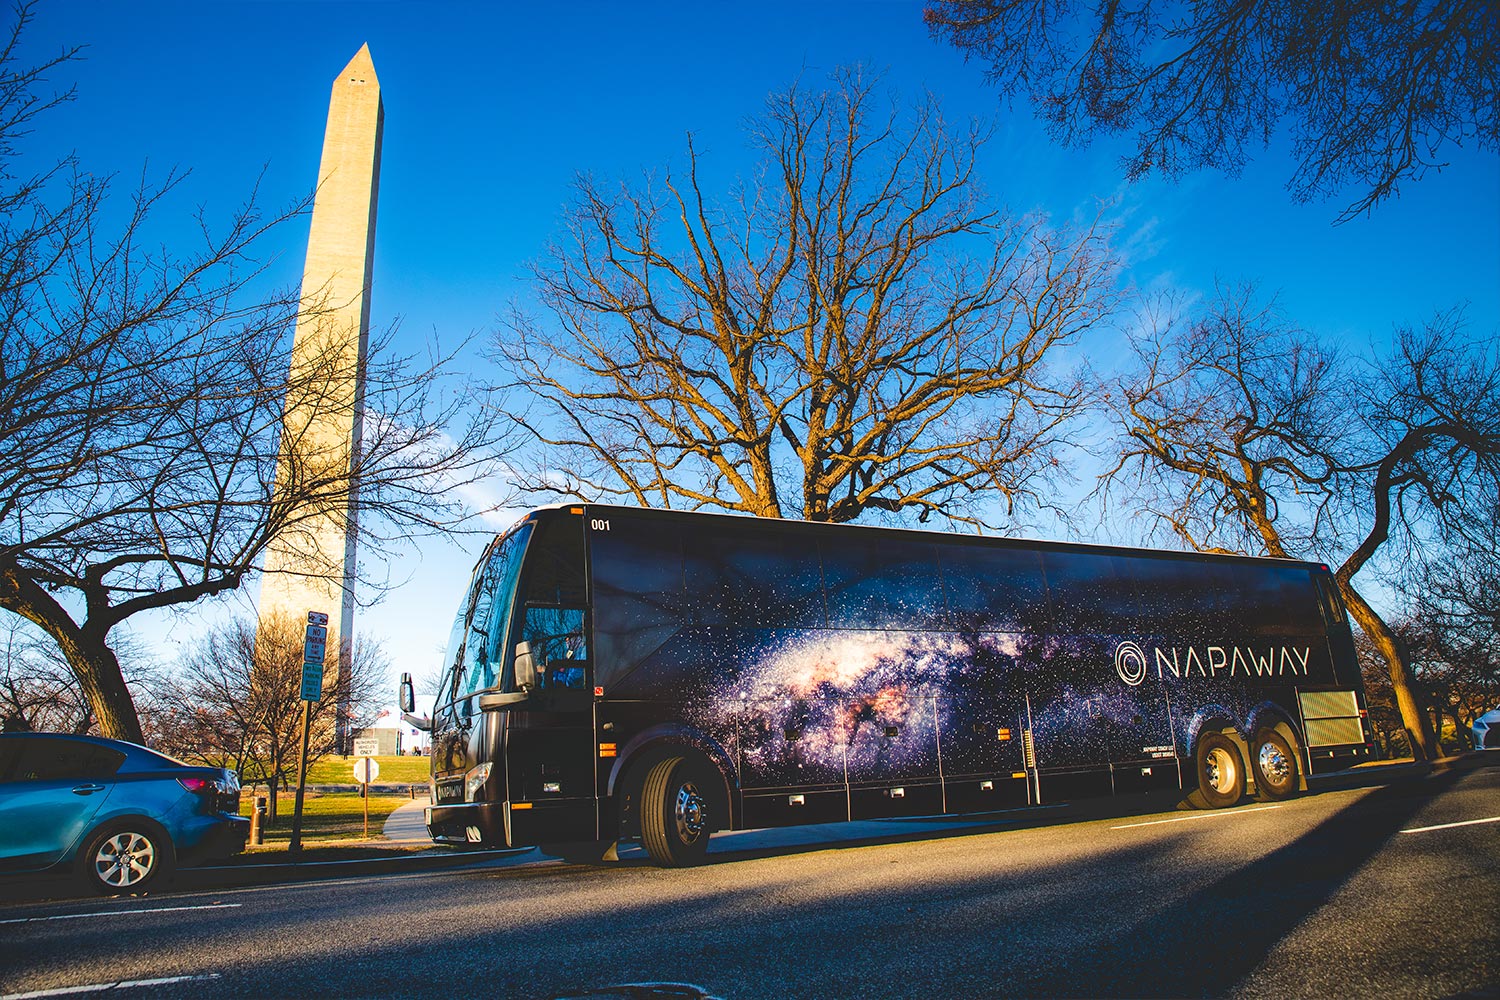 A Napaway sleeper bus driving in front of the Washington Monument in D.C.